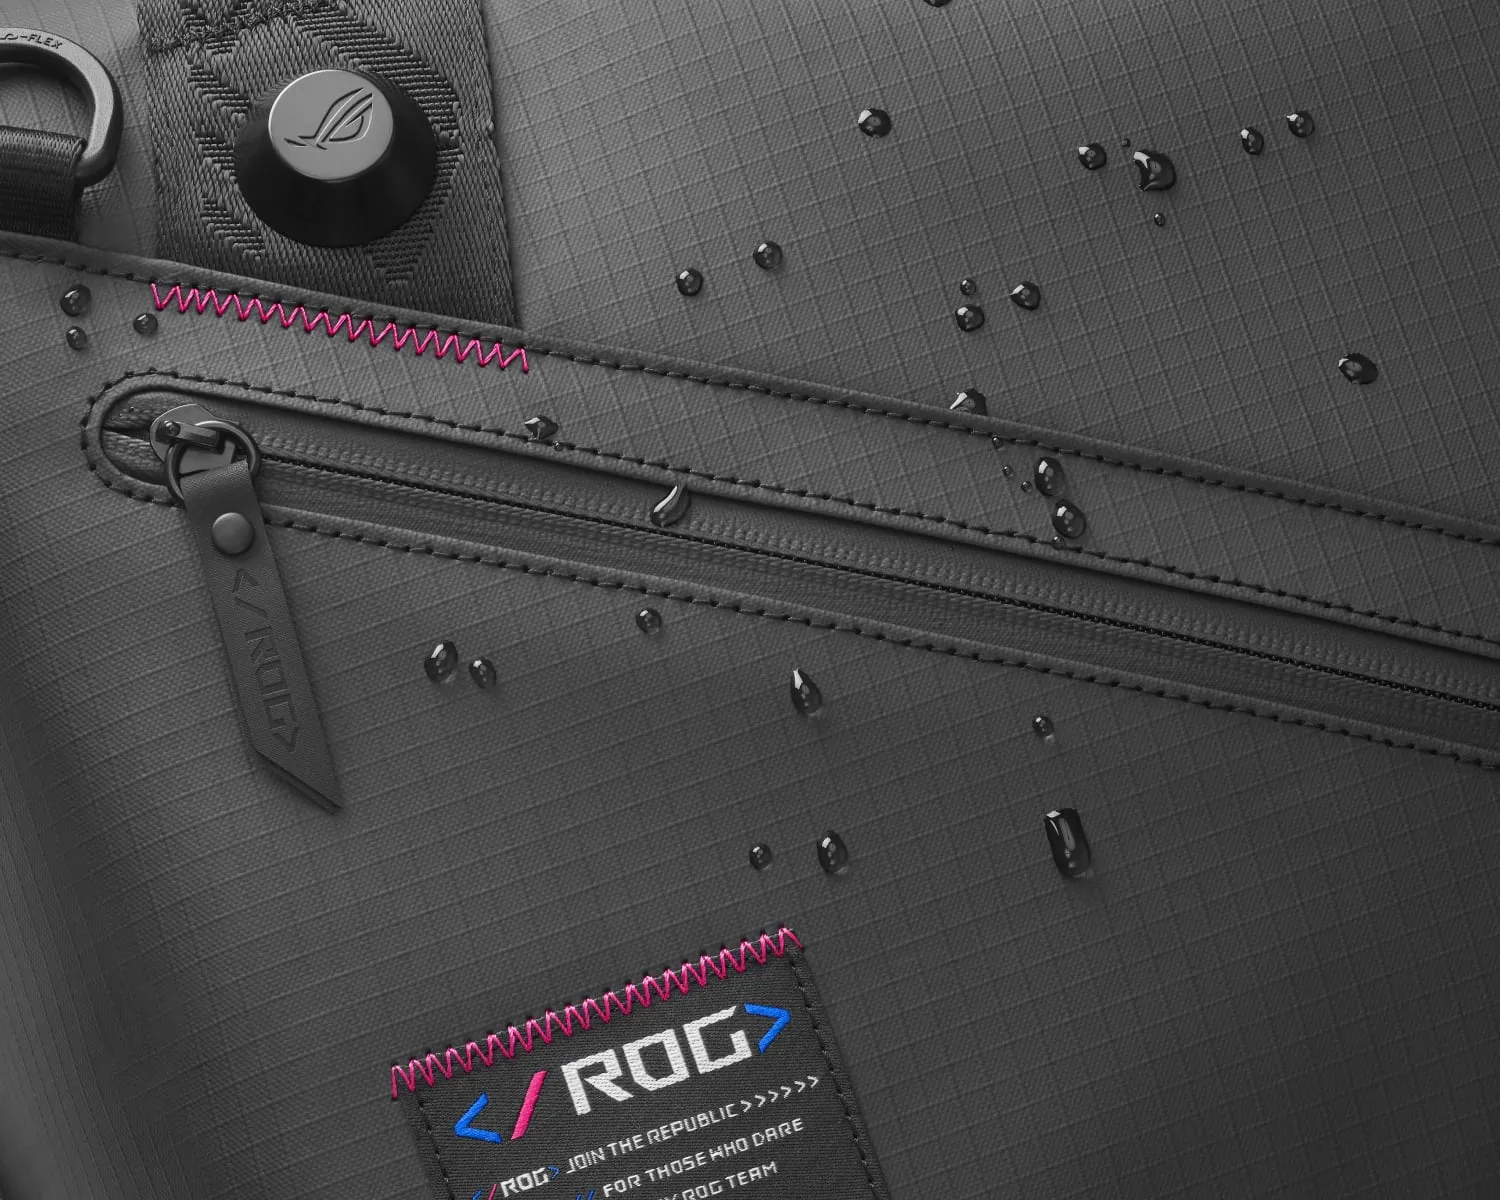 Exterior shot of the main zipper on the ROG SLASH Duffle Bag, with emphasis on the water resistant materials